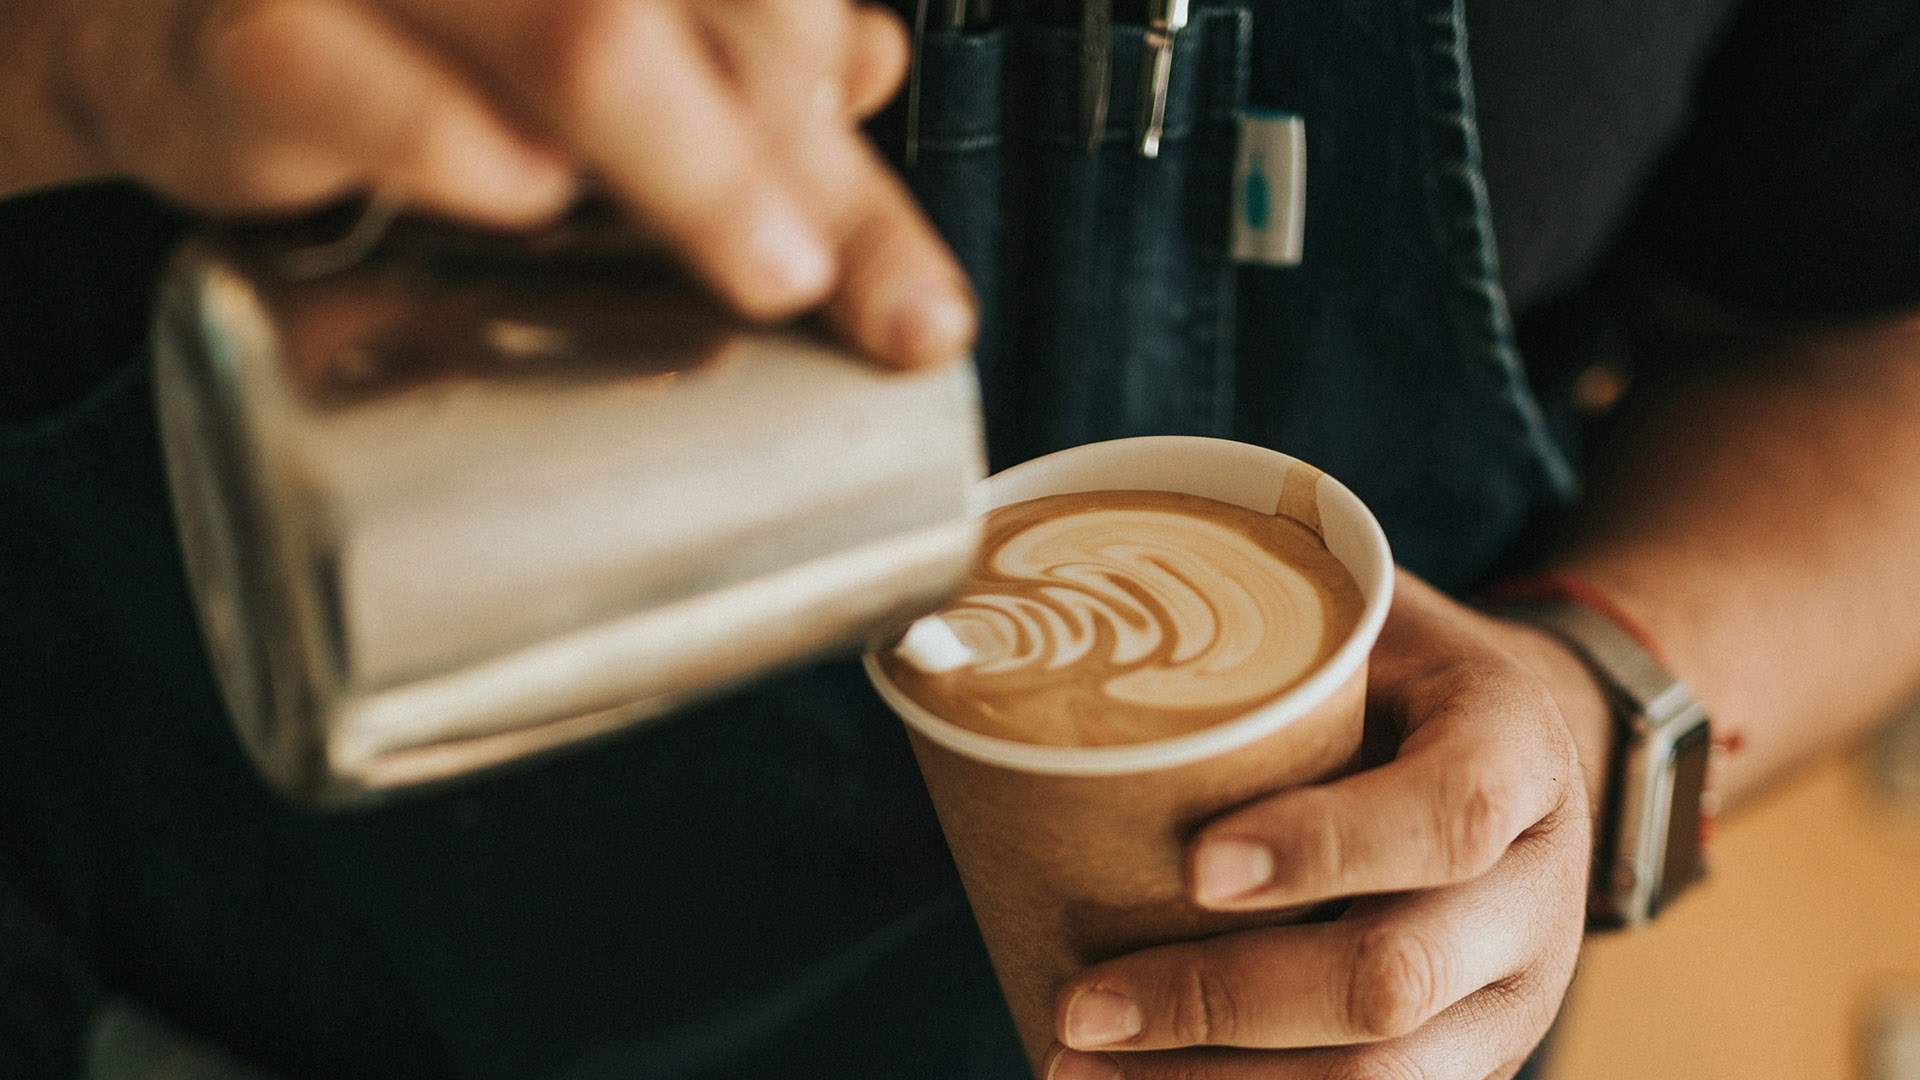 Western Australia Just Became the First State to Ban Single-Use Non-Compostable Coffee Cups